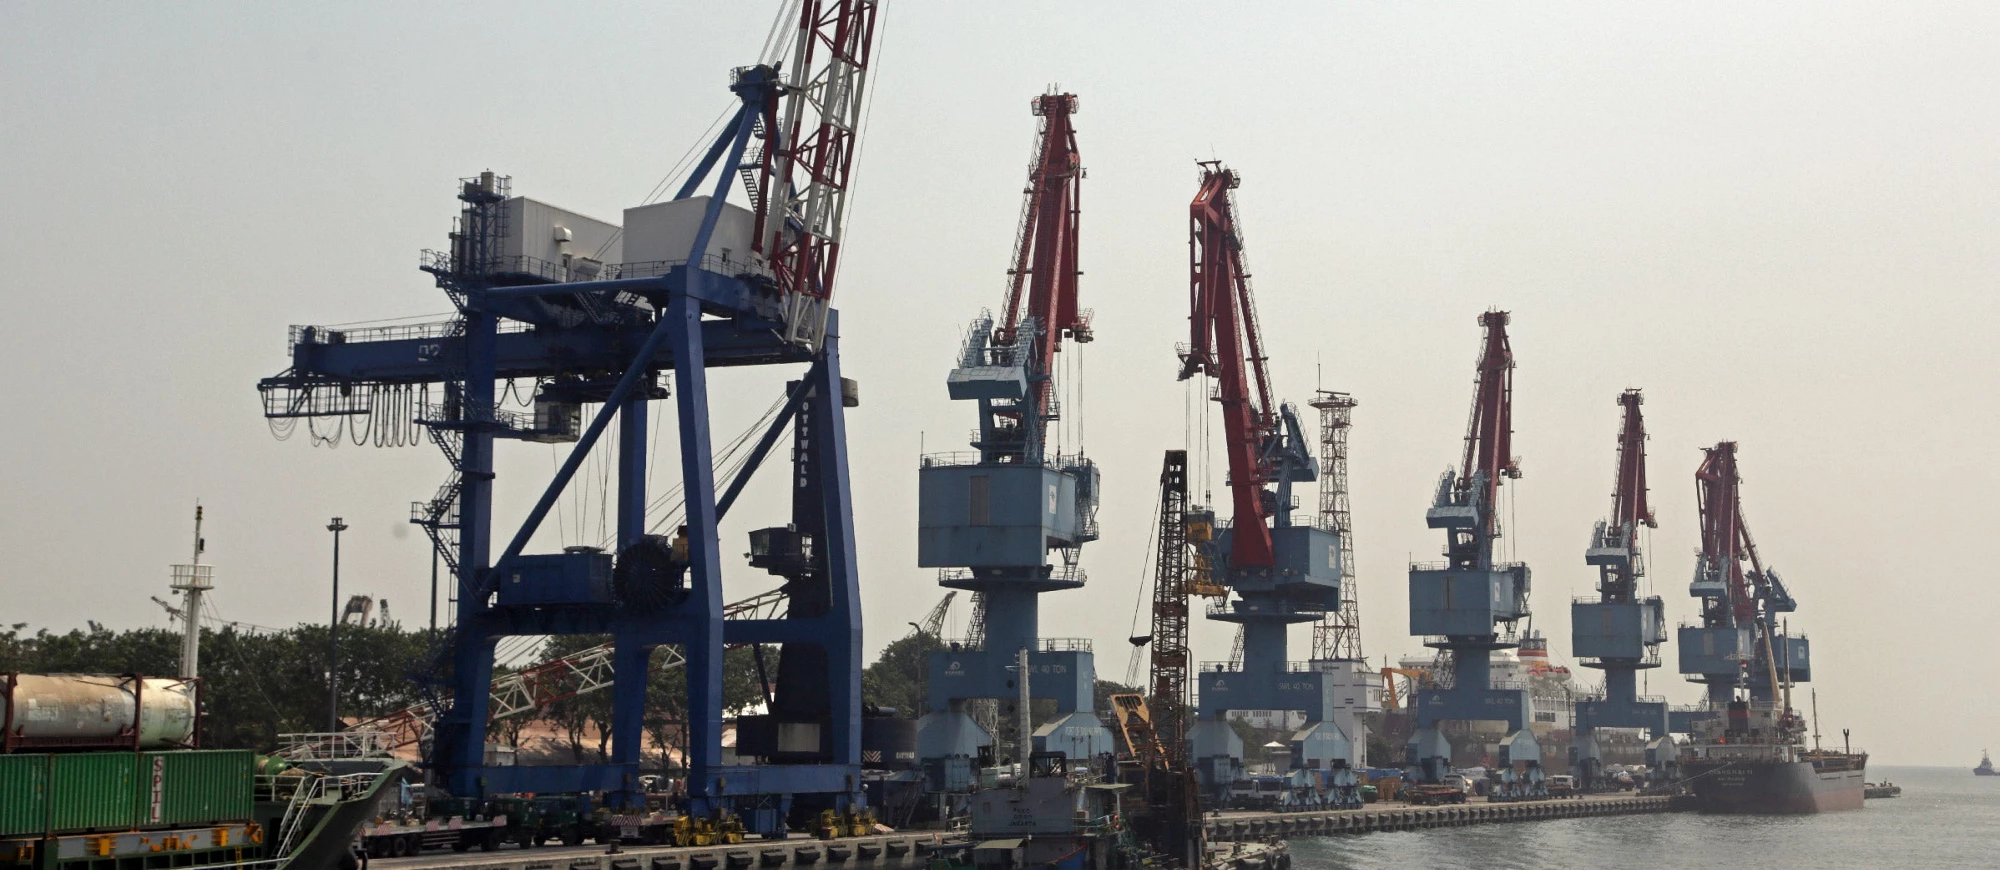 Large cranes at Tanjung Priok port, Indonesia?s most advanced and efficient port. Photo: World Bank Group